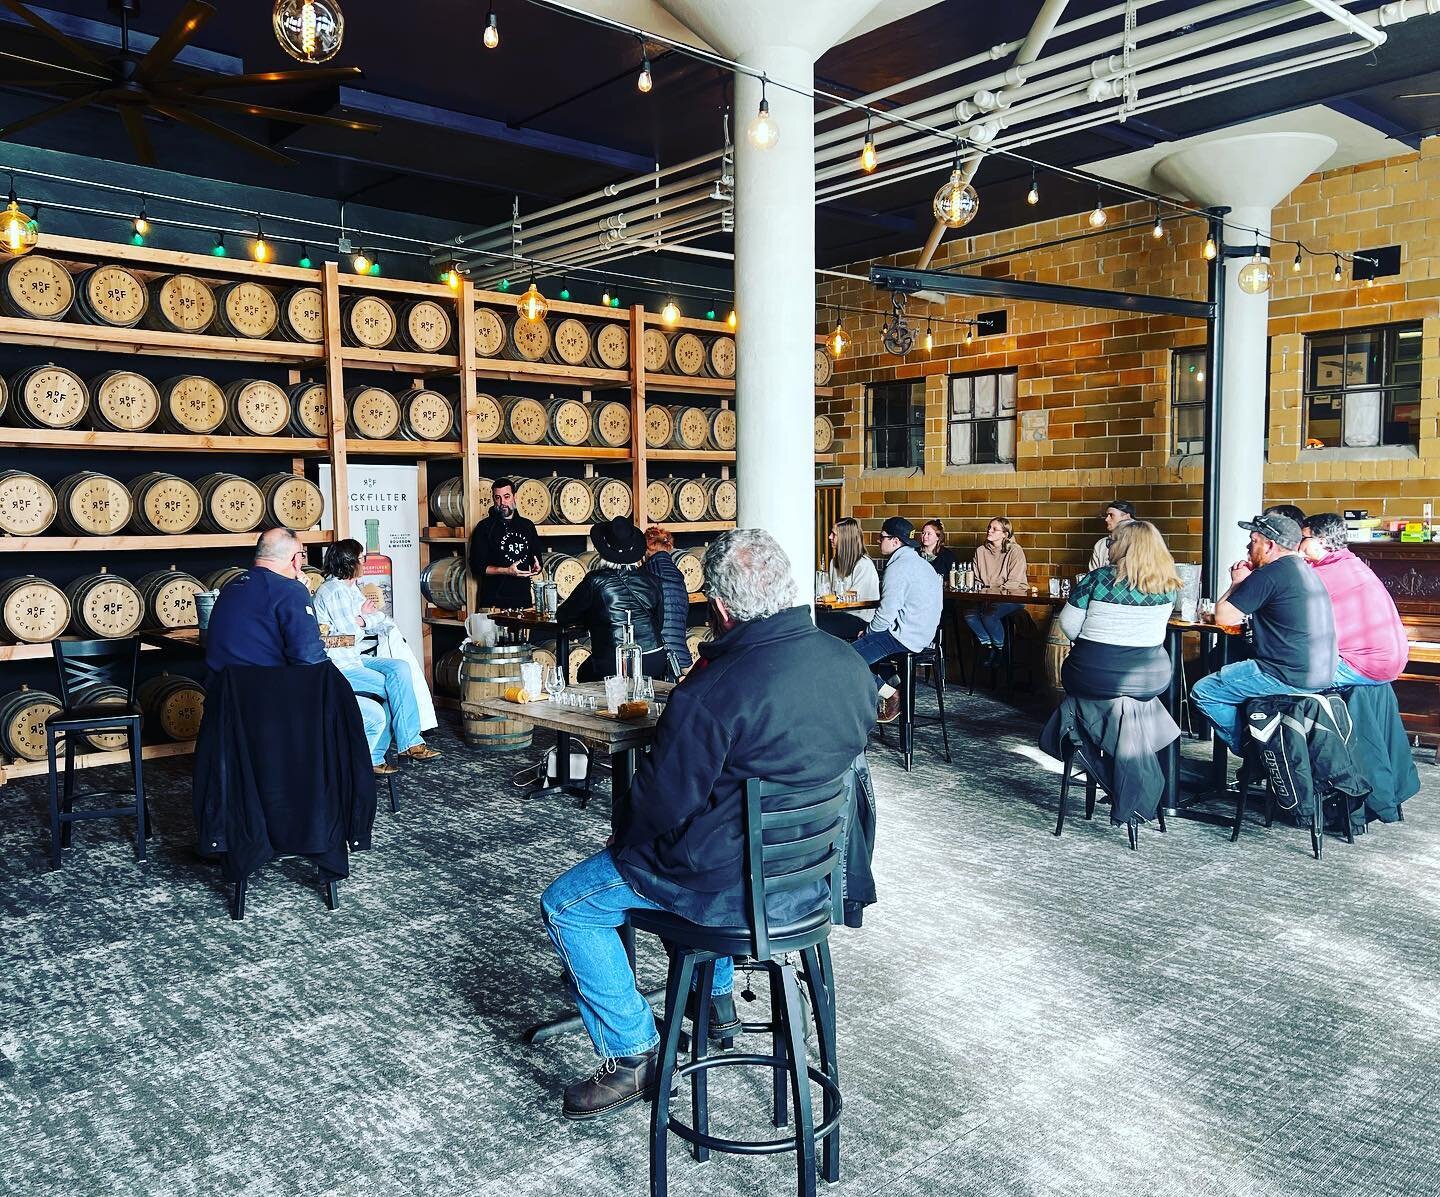 Don&rsquo;t miss out on this month&rsquo;s distillery tour and tasting, this Saturday at 11:30. It&rsquo;s a great opportunity to learn about RockFilter and to enjoy good whiskey with our founder. Reserve your spot by phone, in person, or on our webs